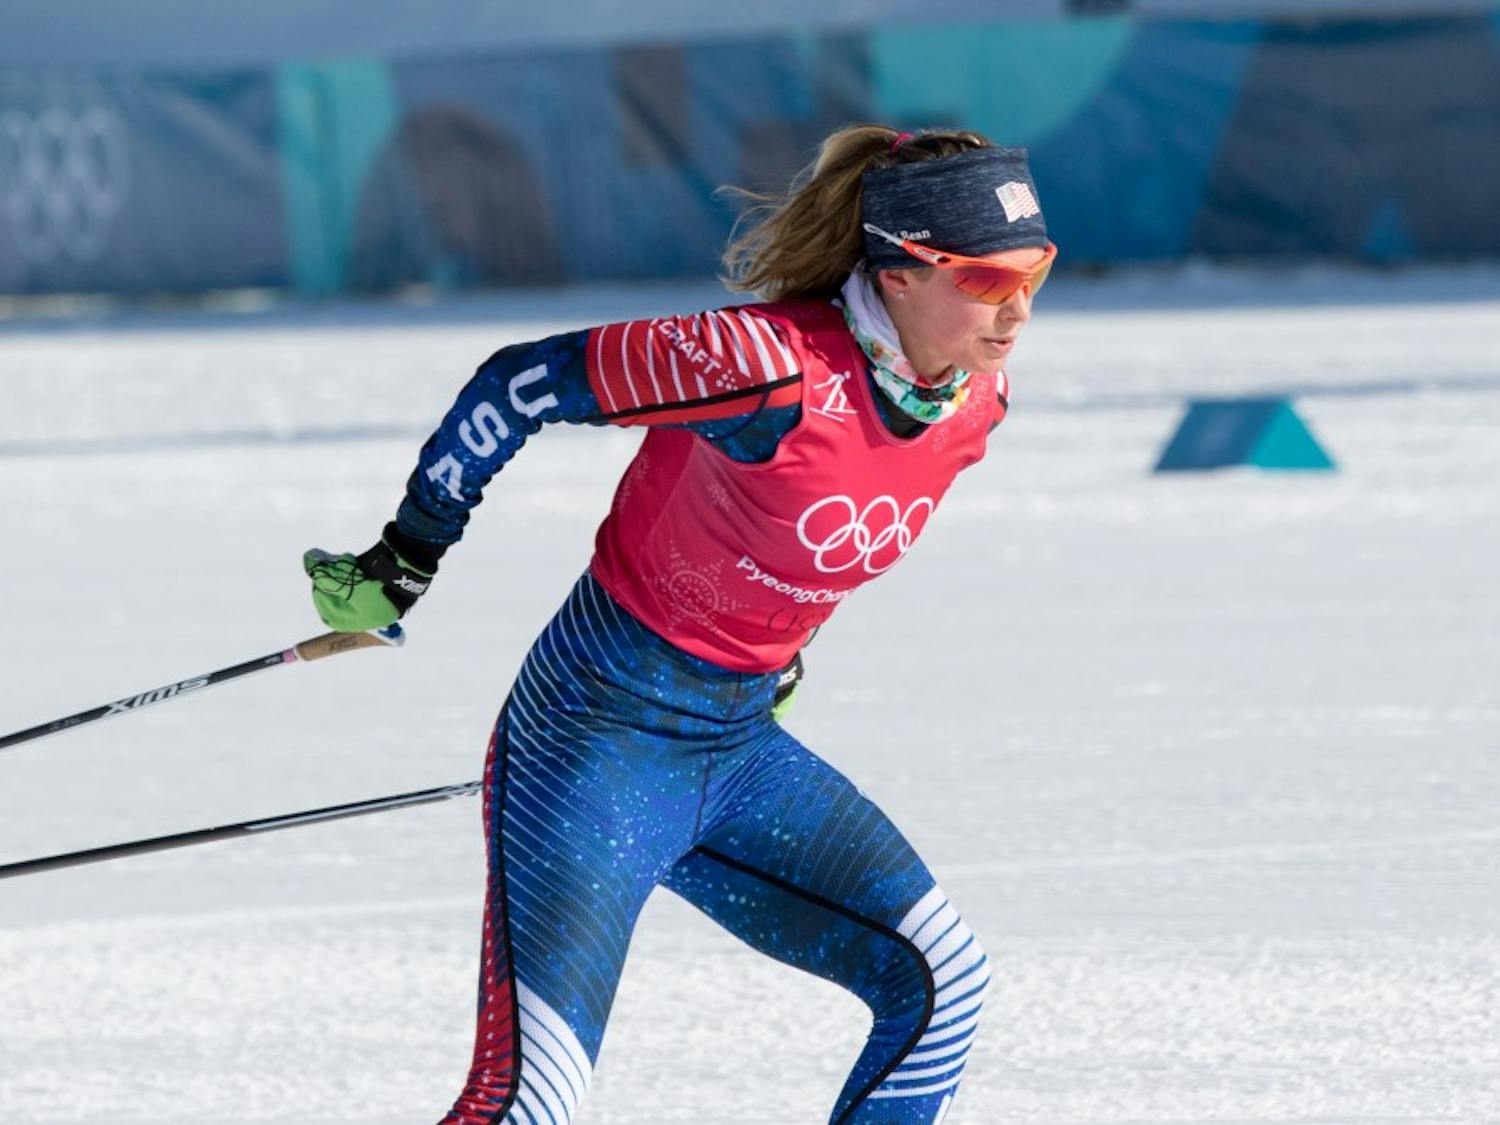 Despite finishing 19th in the freestyle sprint in 2014, Ida Sargent '11 finished 33rd and missed the quarterfinal qualification.&nbsp;